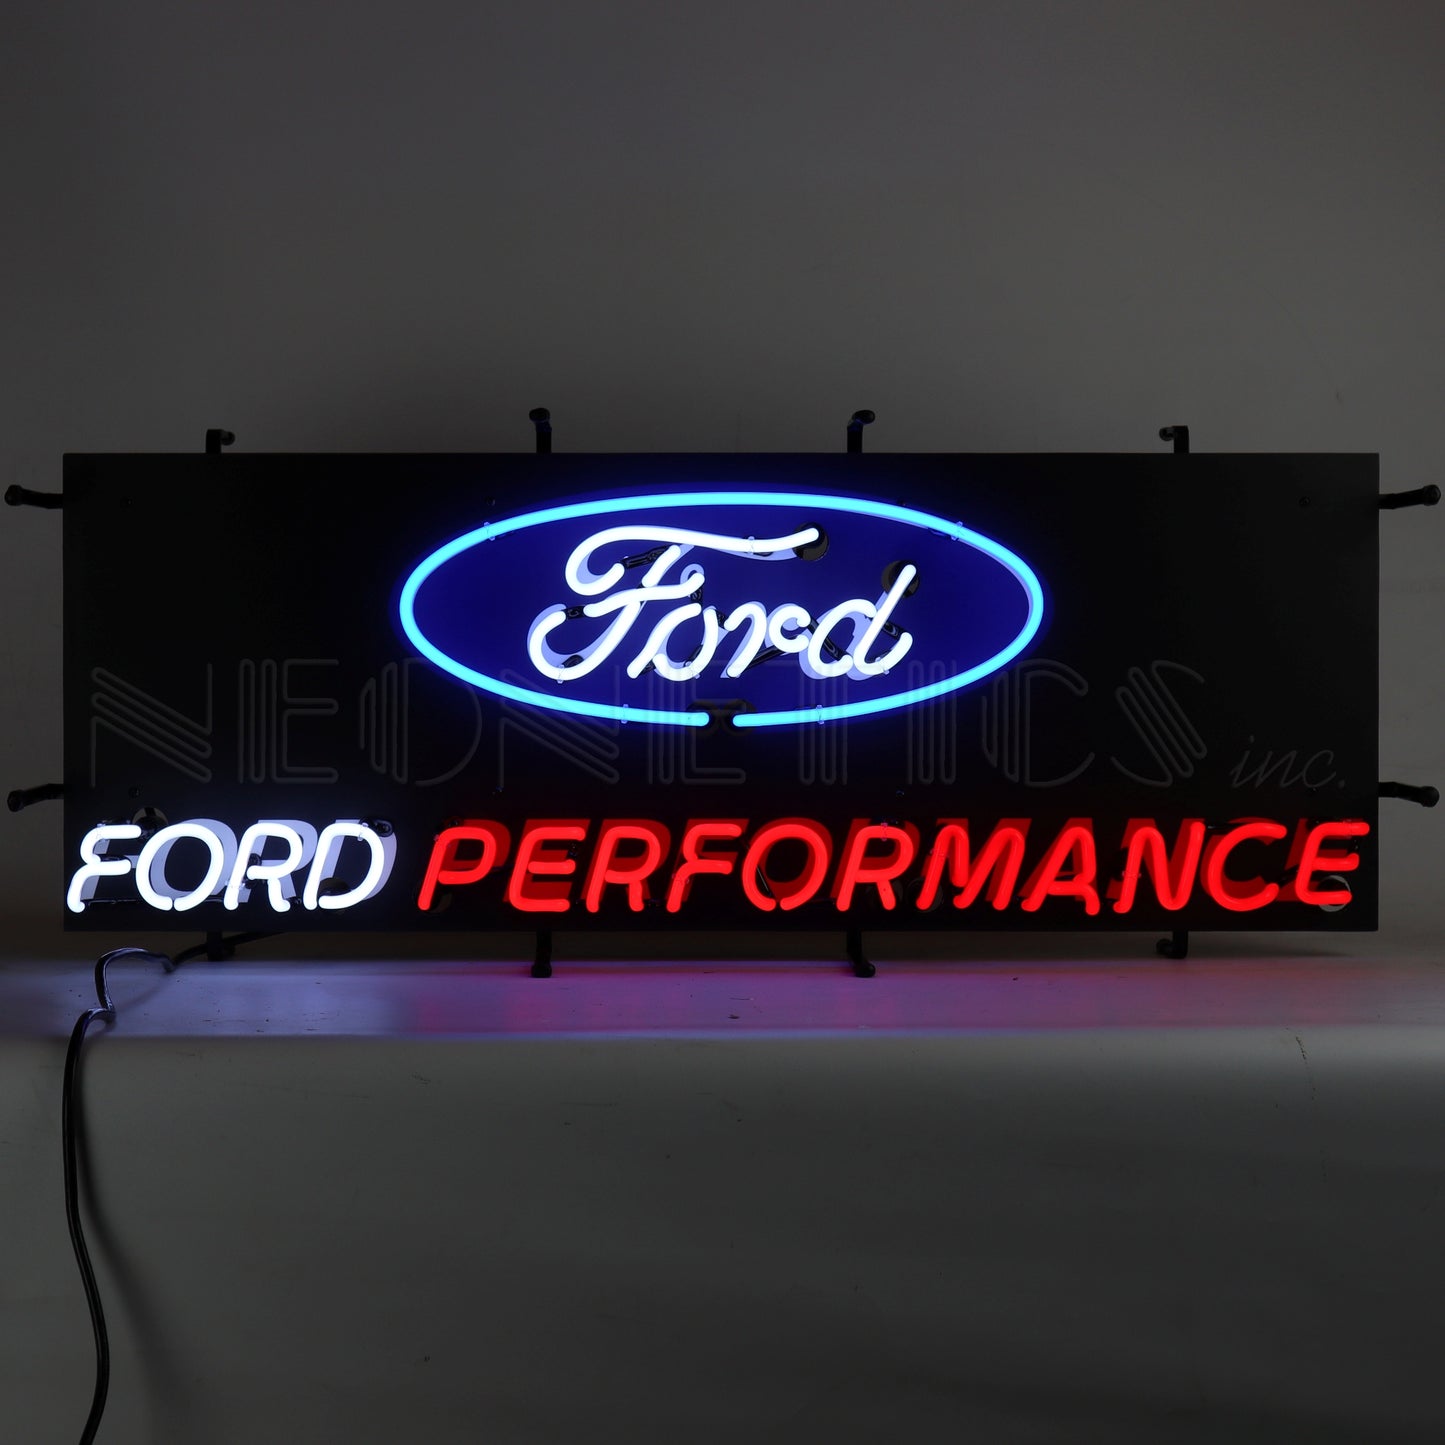 Ford Performance Neon Sign, 36 inches wide by 14 inches high, in bold neon colors.